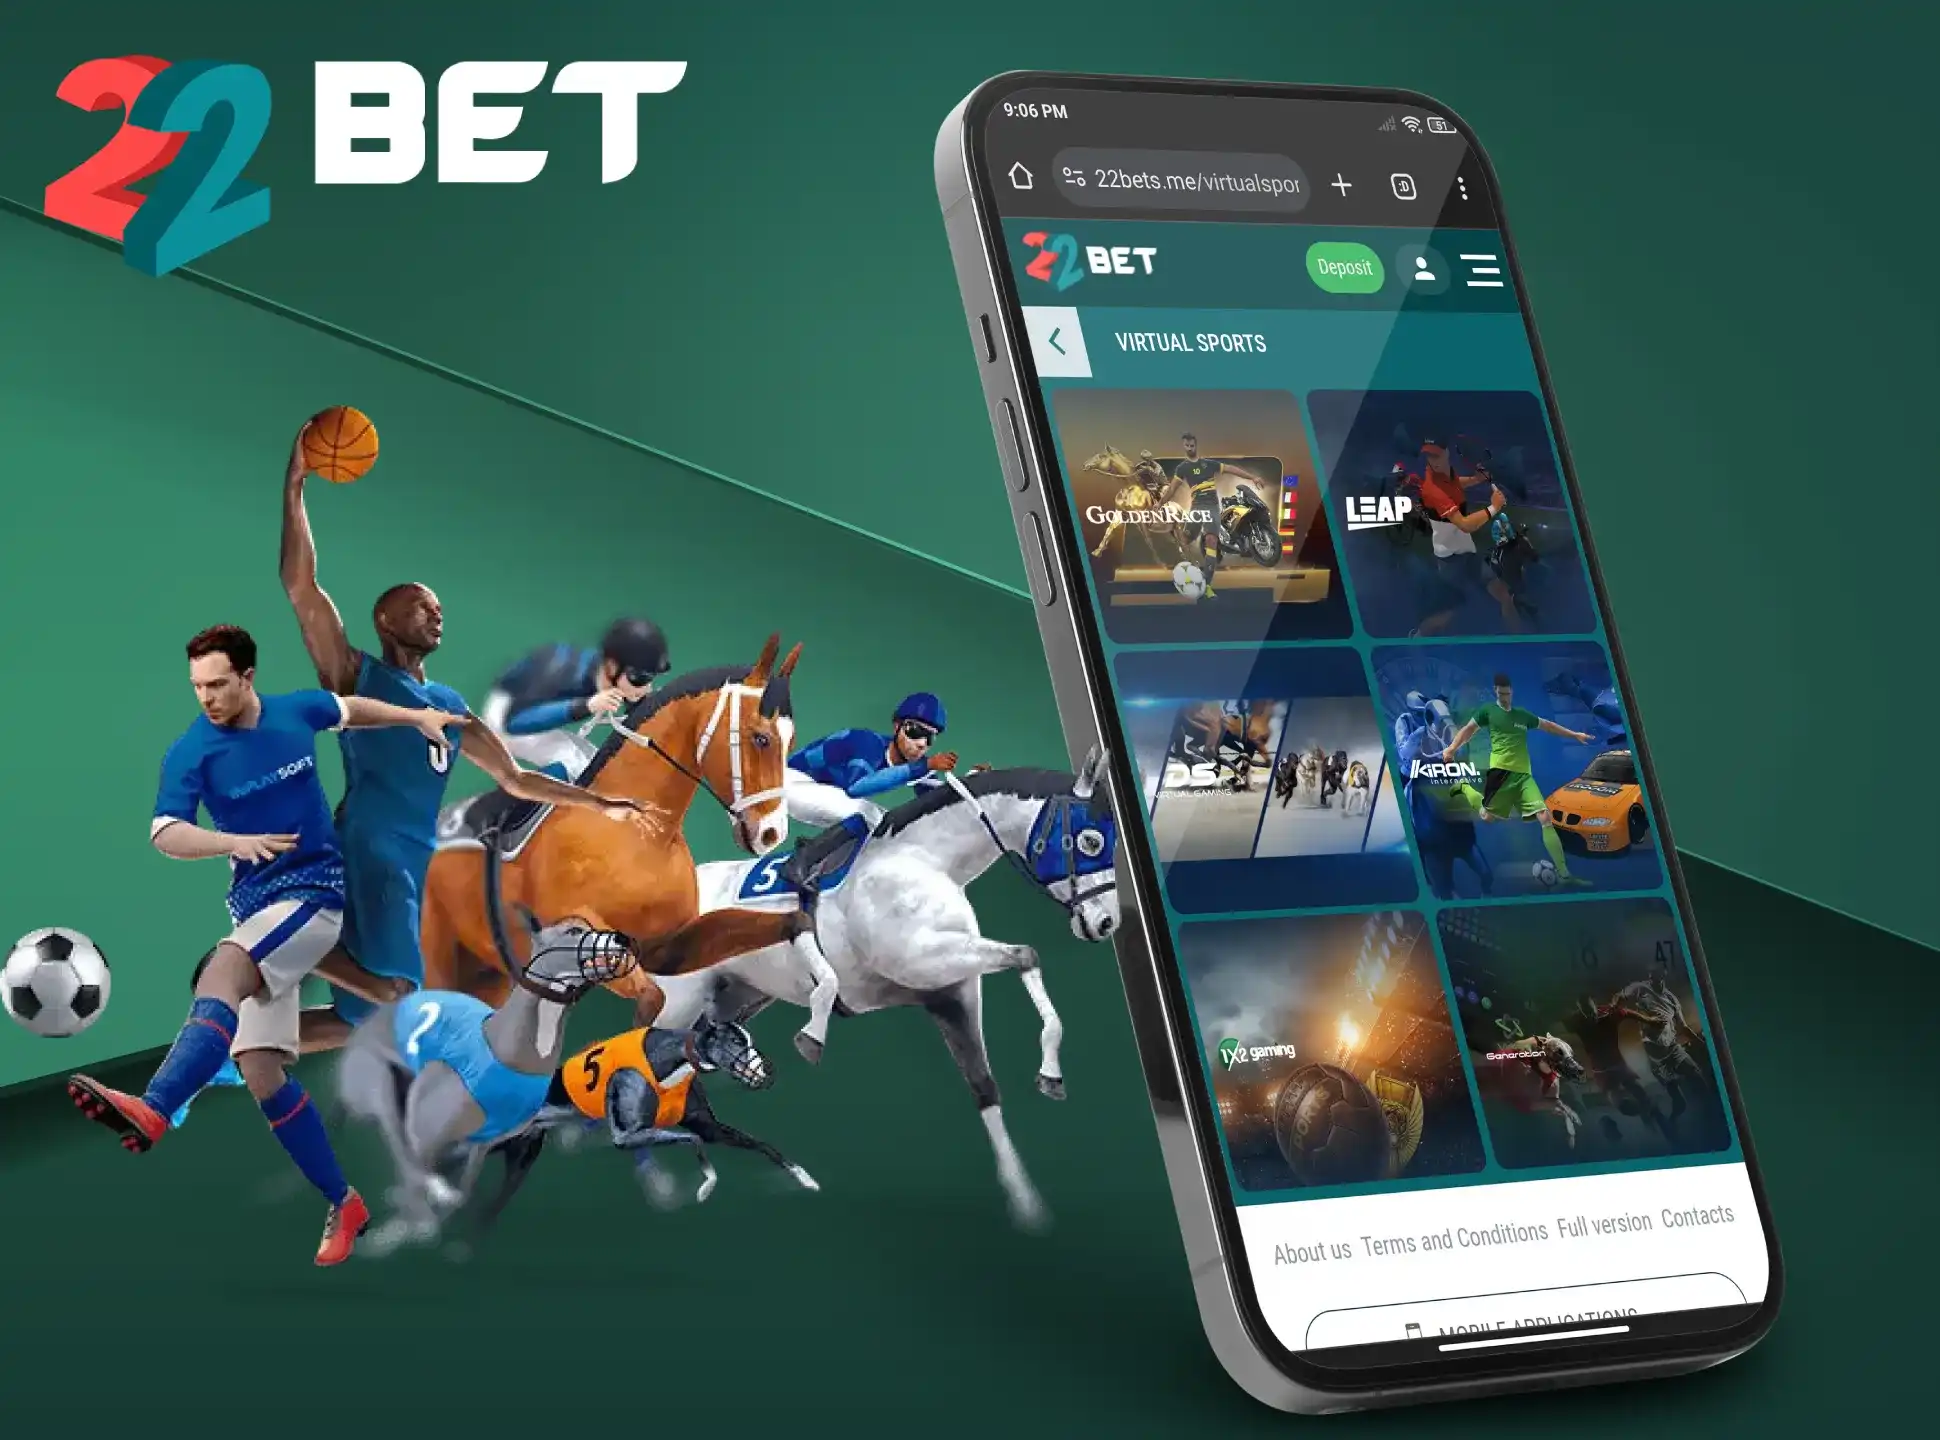 Bet on virtual sports anytime on the 22Bet app.